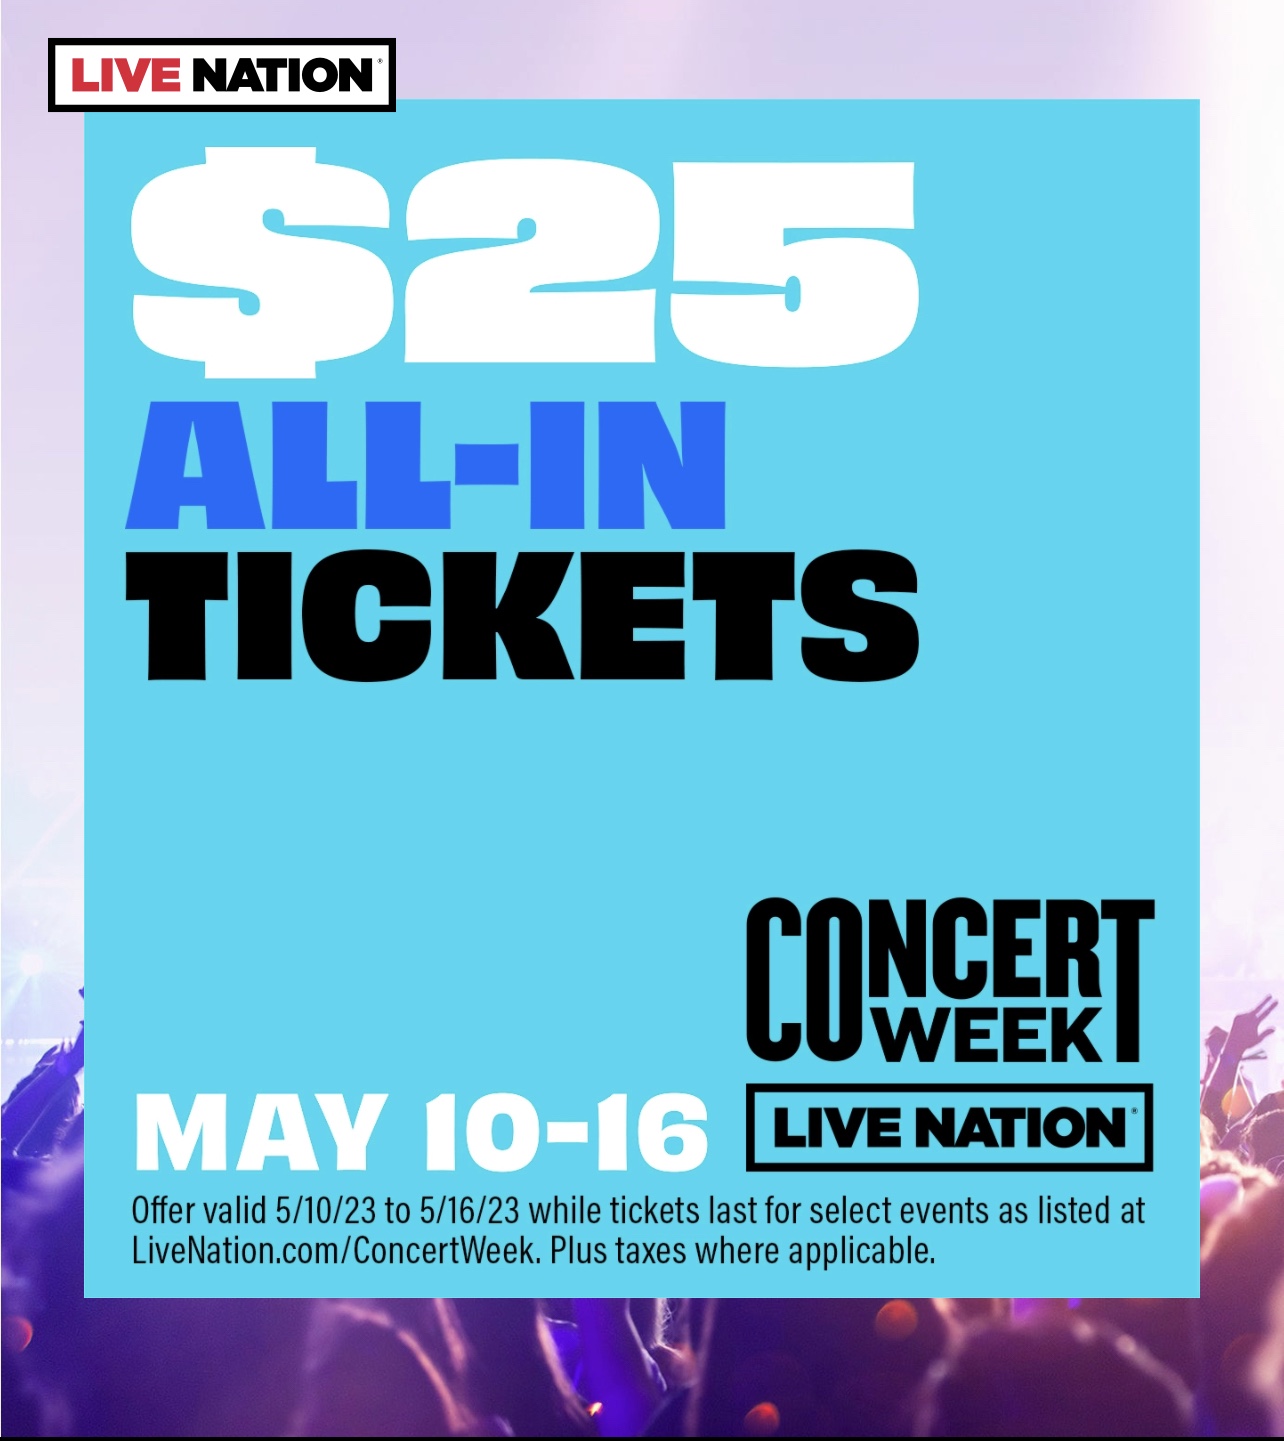 Live Nation returns with 25 tickets for Concert Week Loud & Heavy